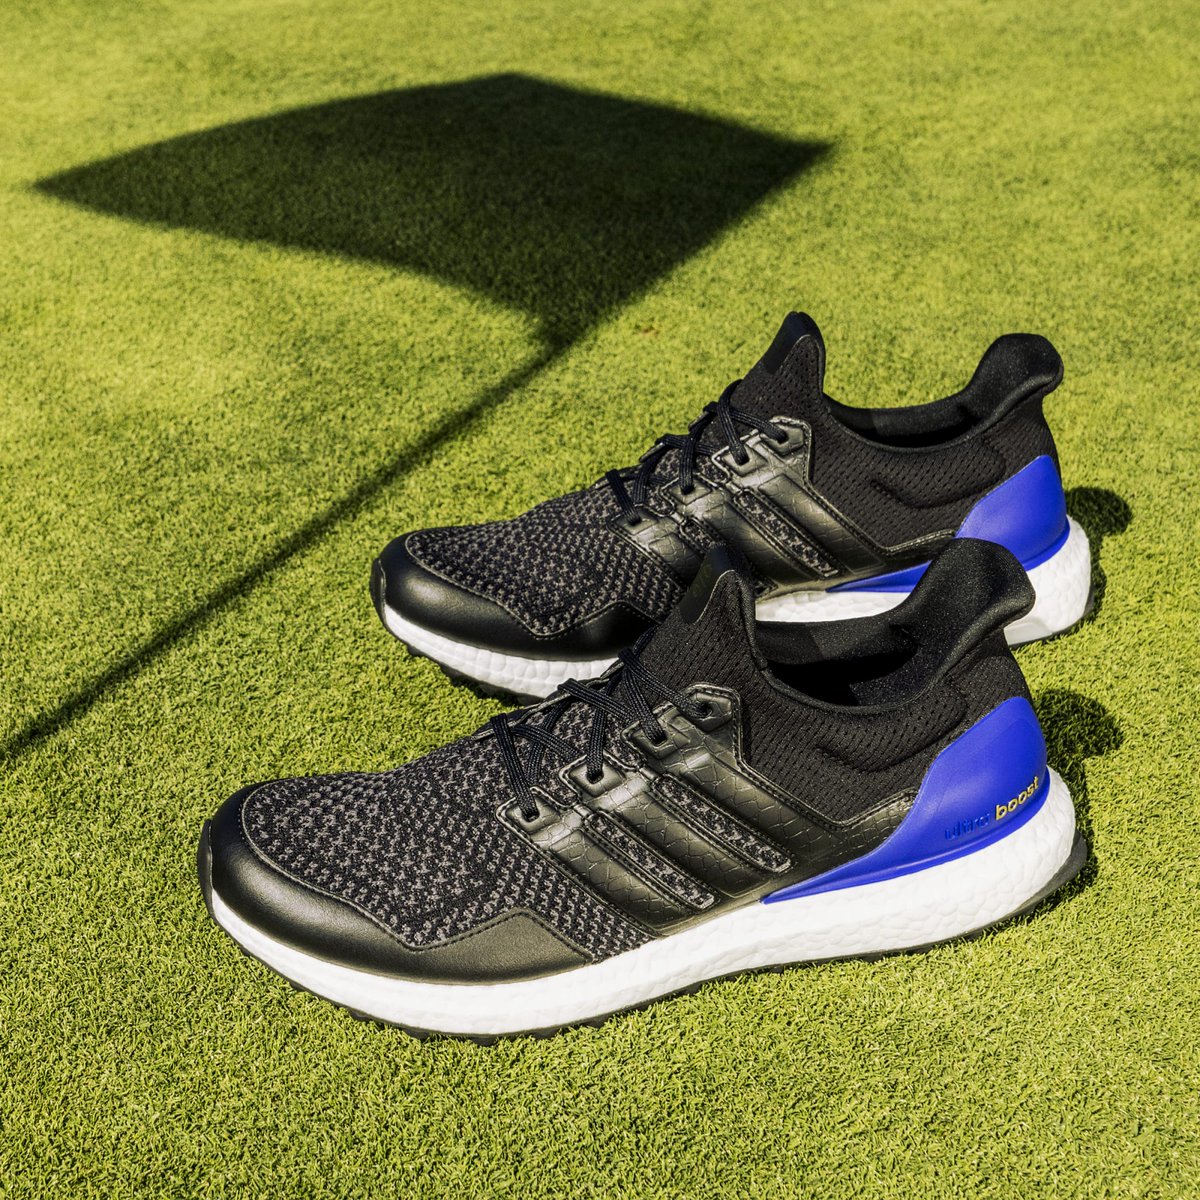 @DICKS 45% OFF on @DICKS.
adidas Ultra Boost 1.0 Golf OG.
Retail $200. Now $107 shipped.
🔗 bit.ly/3wpM3Ve  ad